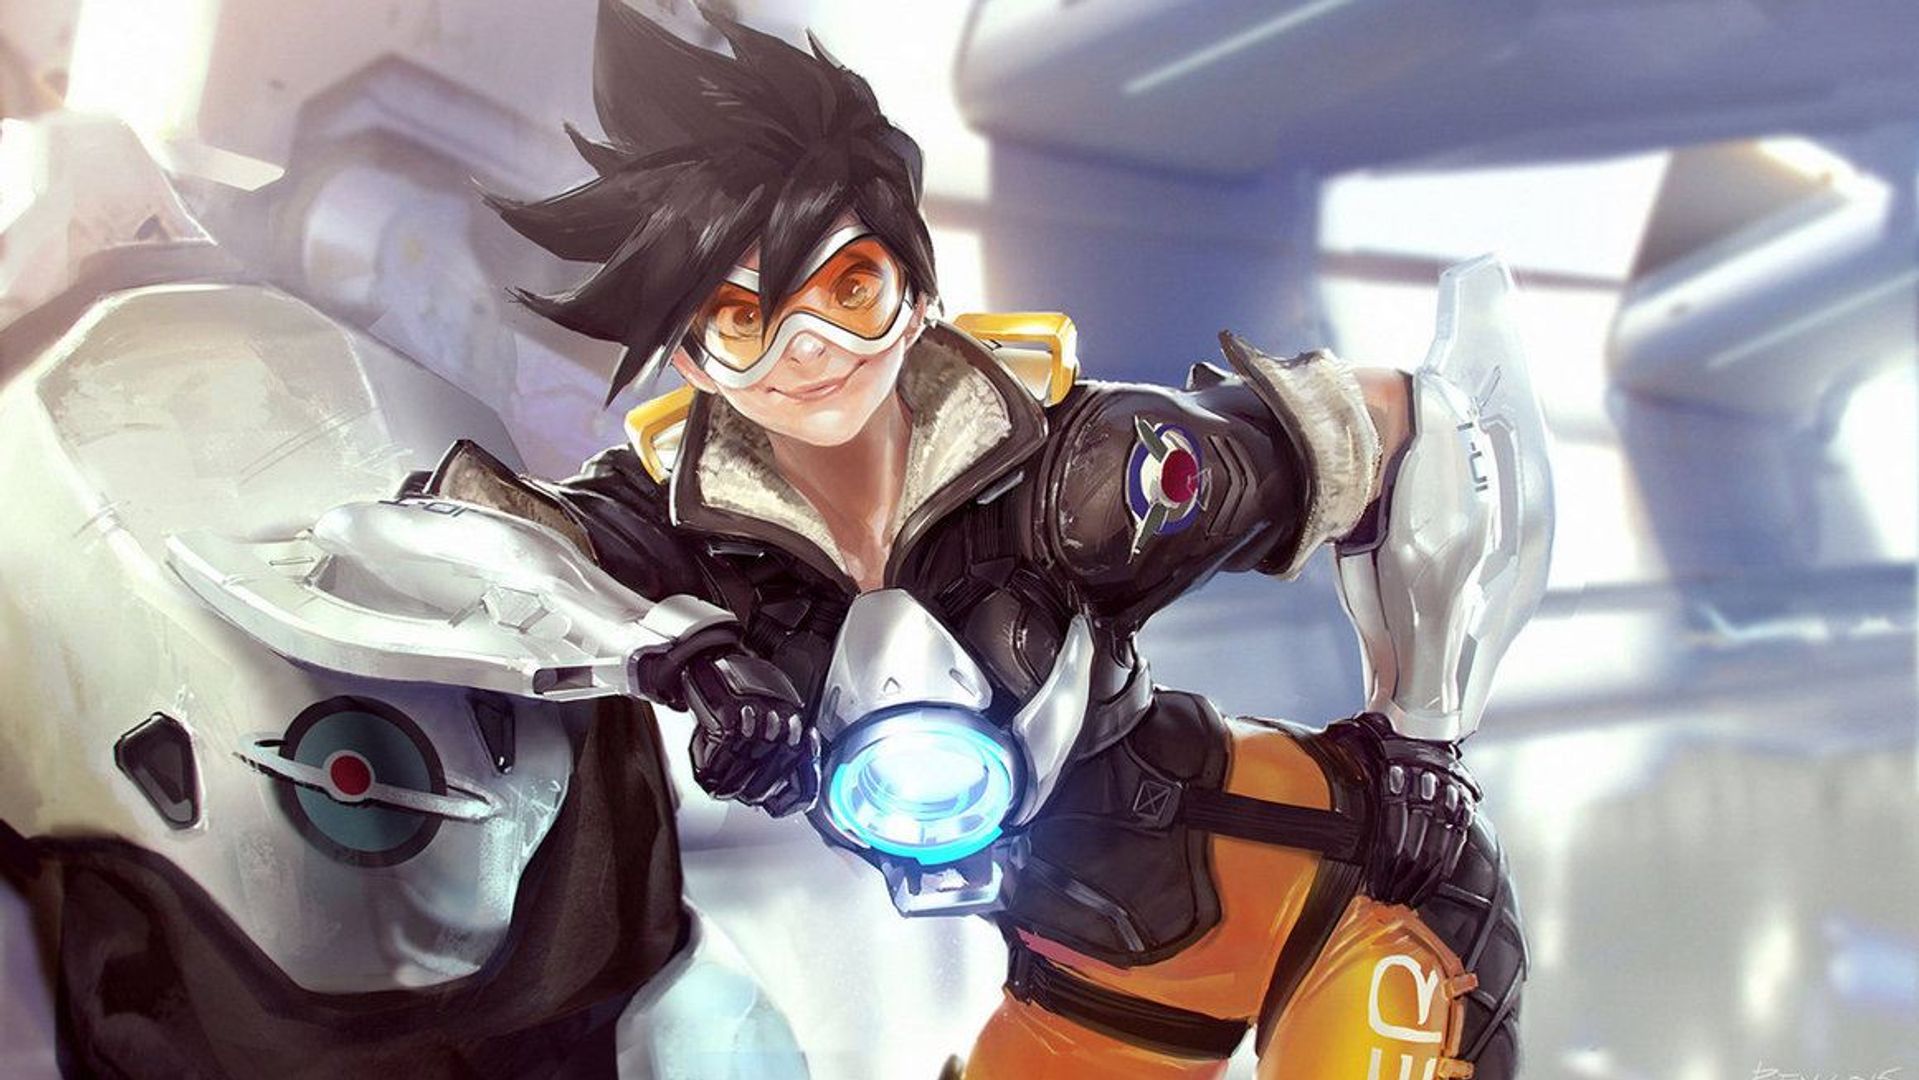 Tracer: Tips, Maps, Counters, Abilities, and Ultimate